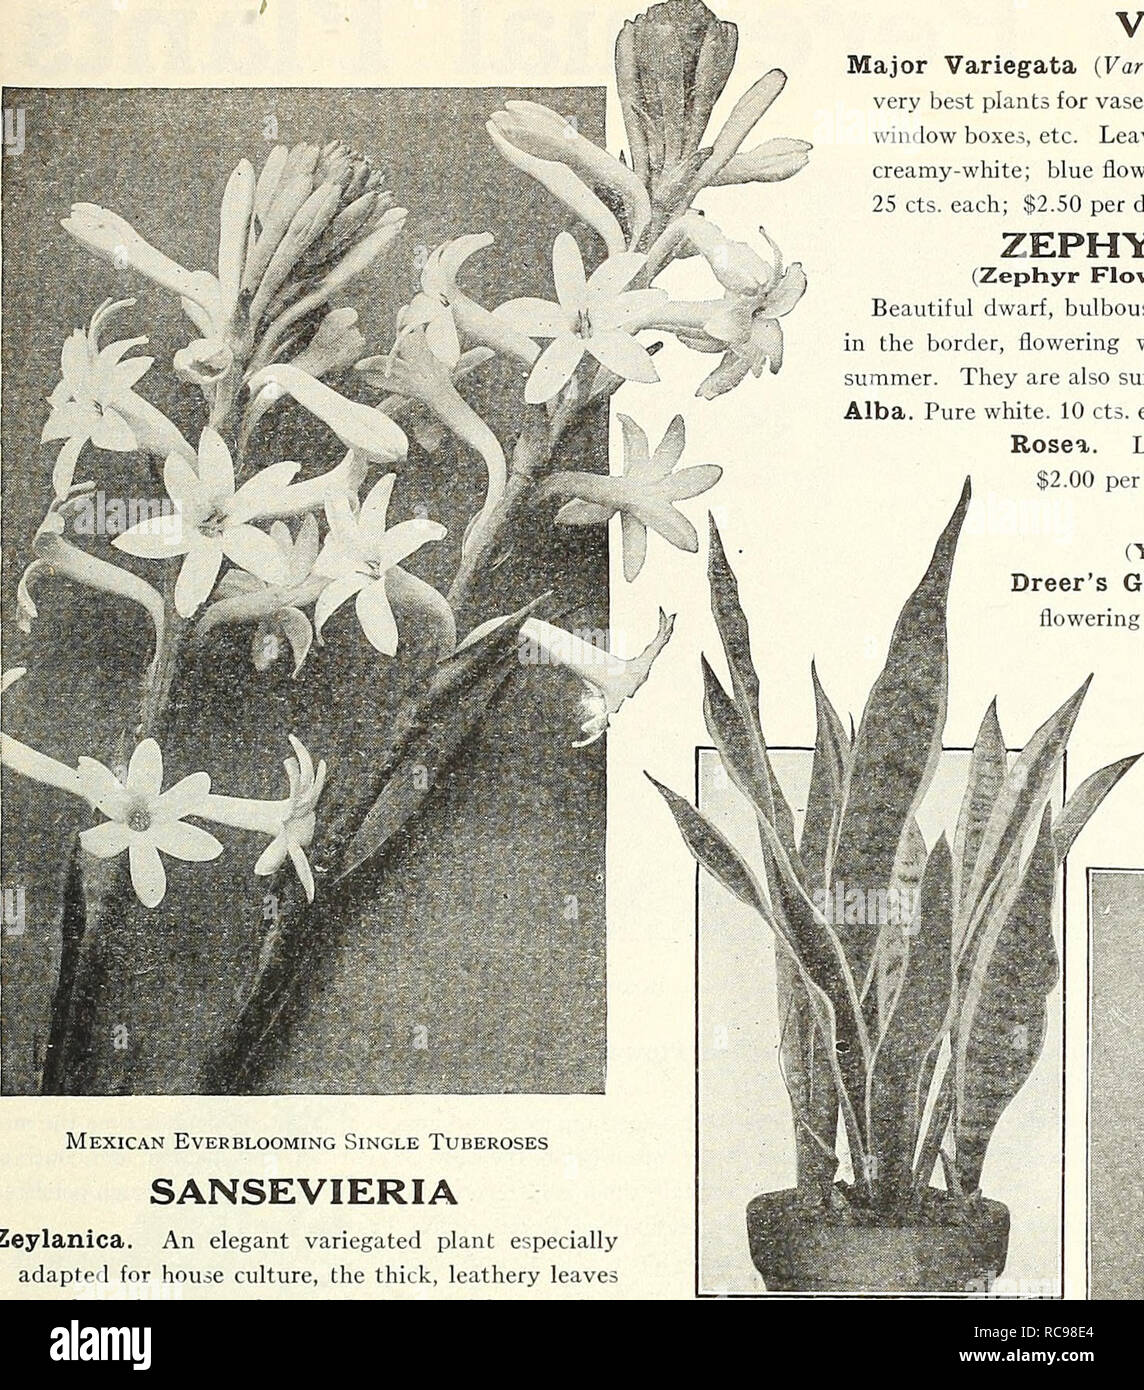 . Dreer's garden book 1924. Seeds Catalogs; Nursery stock Catalogs; Gardening Equipment and supplies Catalogs; Flowers Seeds Catalogs; Vegetables Seeds Catalogs; Fruit Seeds Catalogs. (flEHRXABREEPu^ QARDENsNi'GREEHHOUSE PLANTA ^HILBMiPlffllk 167. VINCA Major Variegata (Variegated Periwinkle). One of the very best plants for vases, and for trailing over the edges of window boxes, etc. Leaves glossy-green, broadly margined creamy-white; blue flowers. Strong plants in 4-inch pots, 25 cts. each; $2.50 per doz. ZEPHYRANTHES (Zephyr Flower or Fairy Lilies) Beautiful dwarf, bulbous plant, very effe Stock Photo